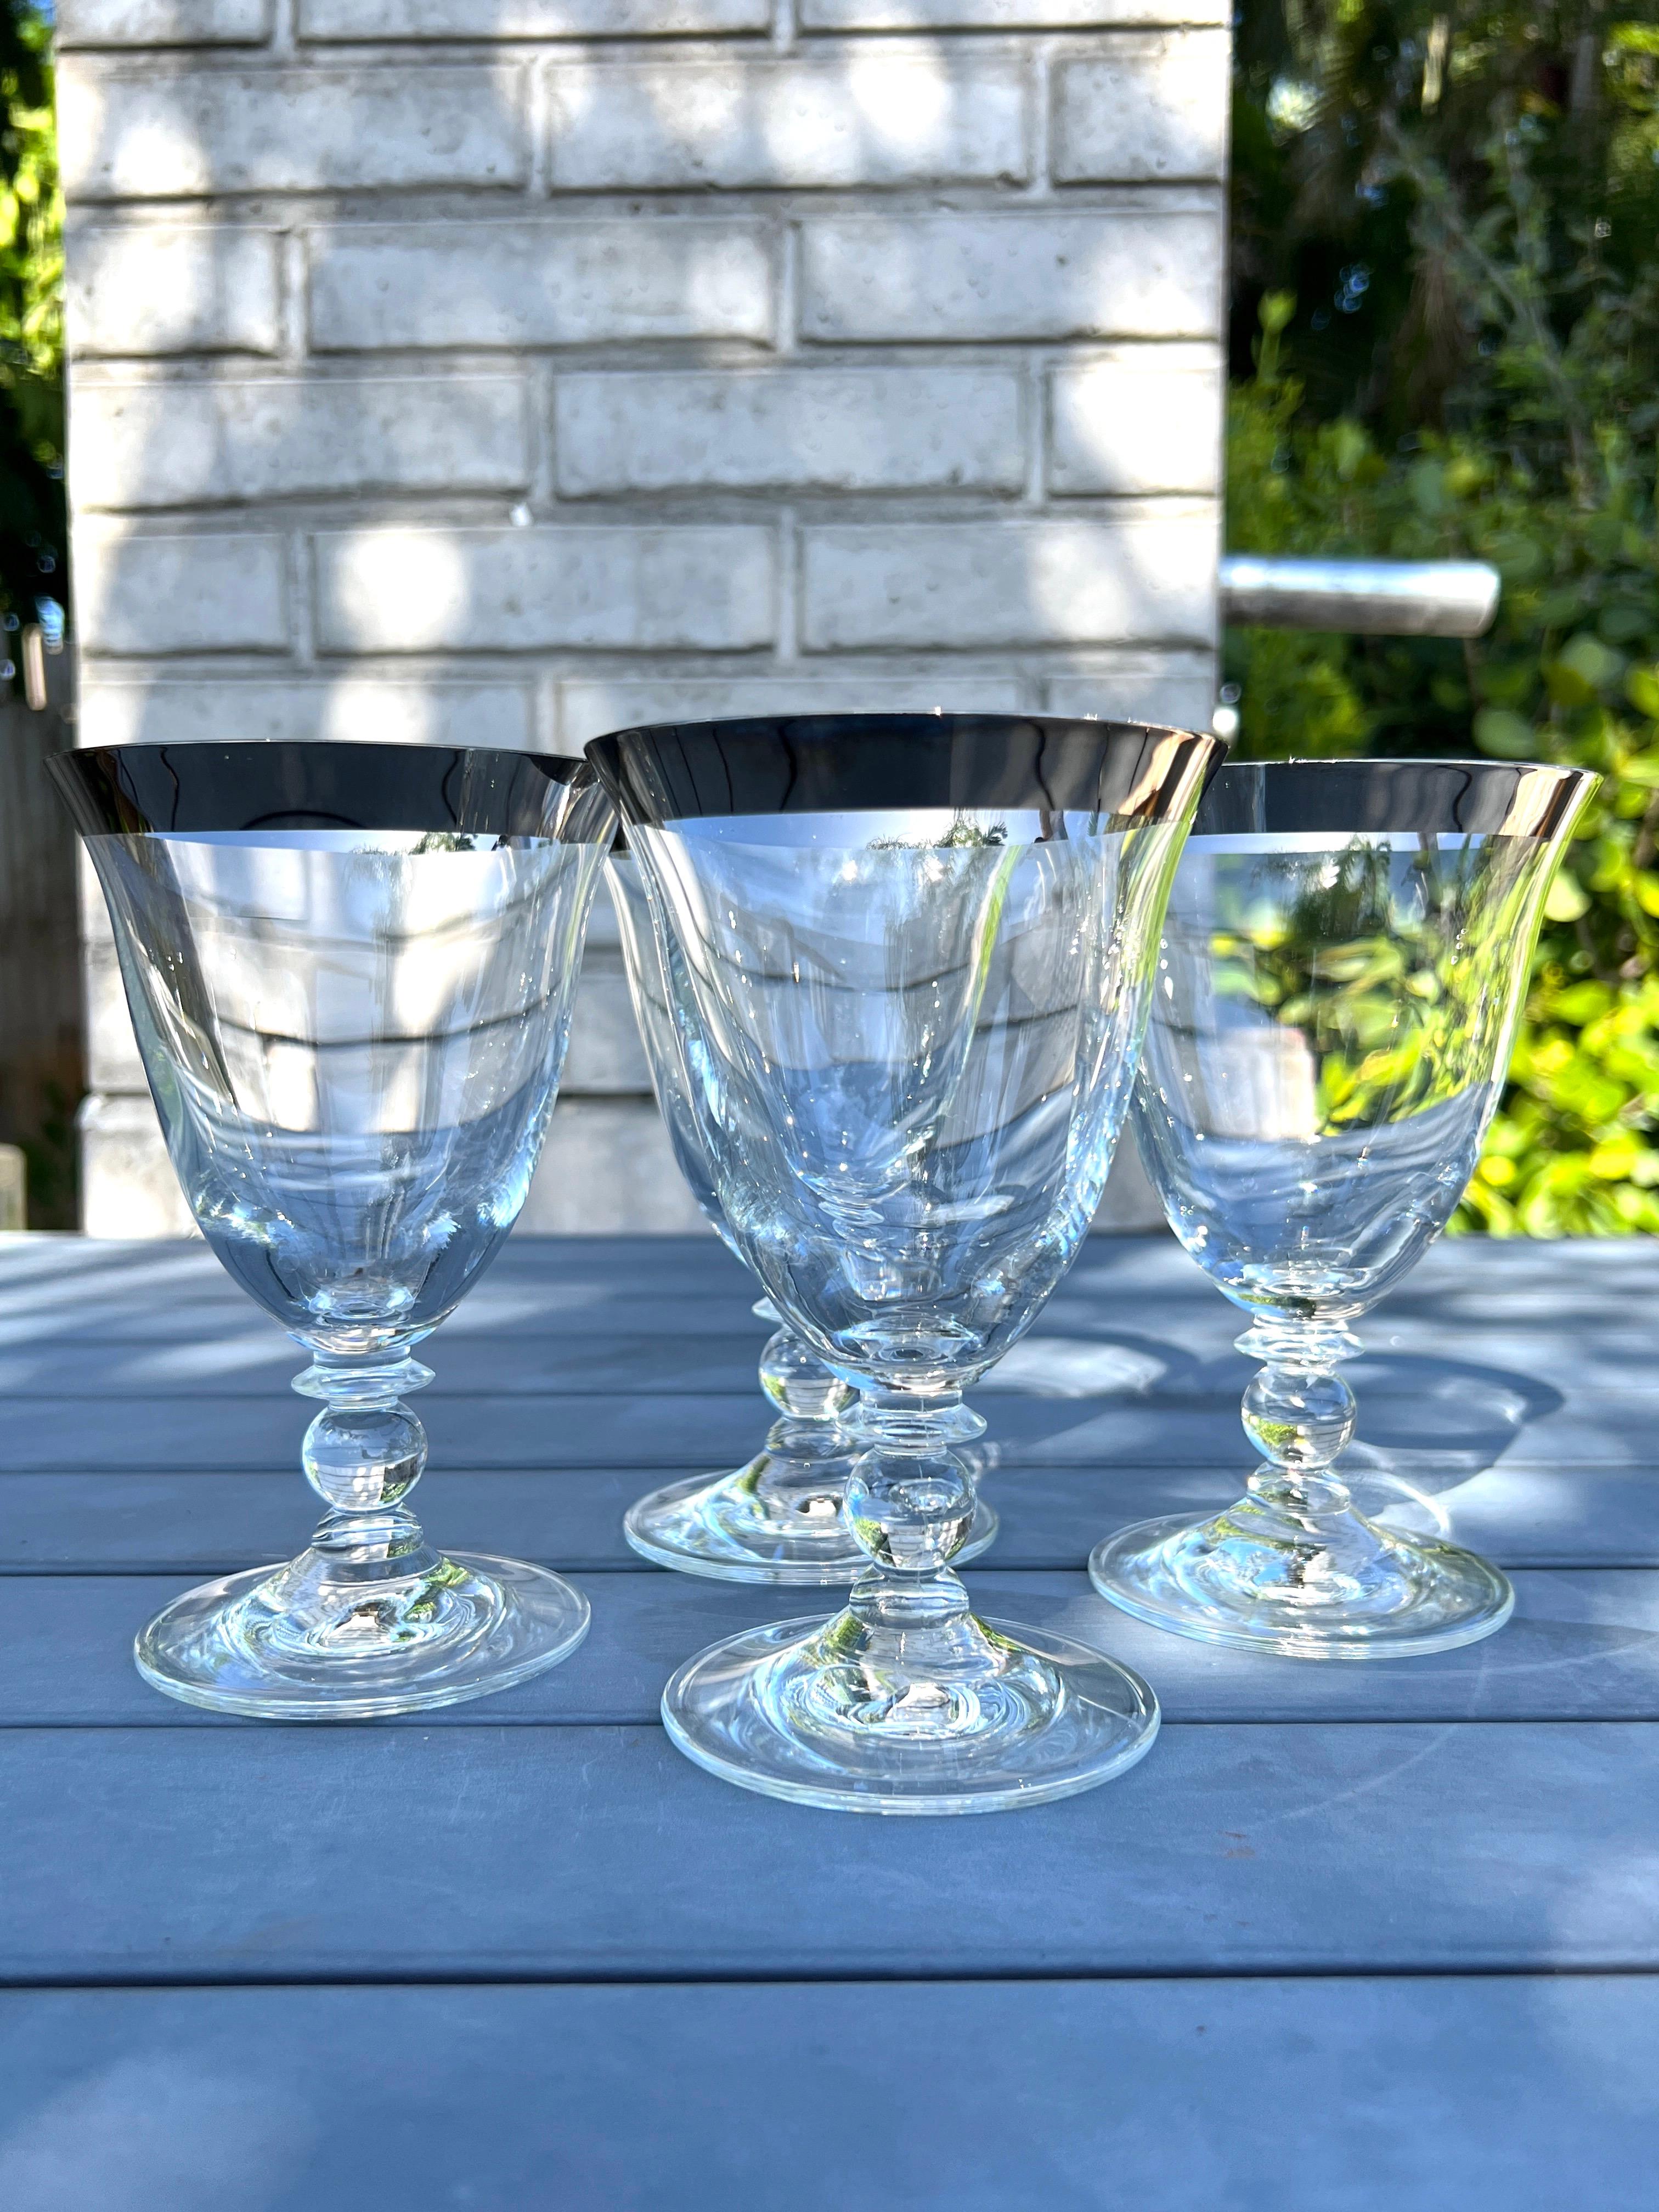 Crystal Set of Dorothy Thorpe Water Goblets with Silver Rim Design, c. 1970's